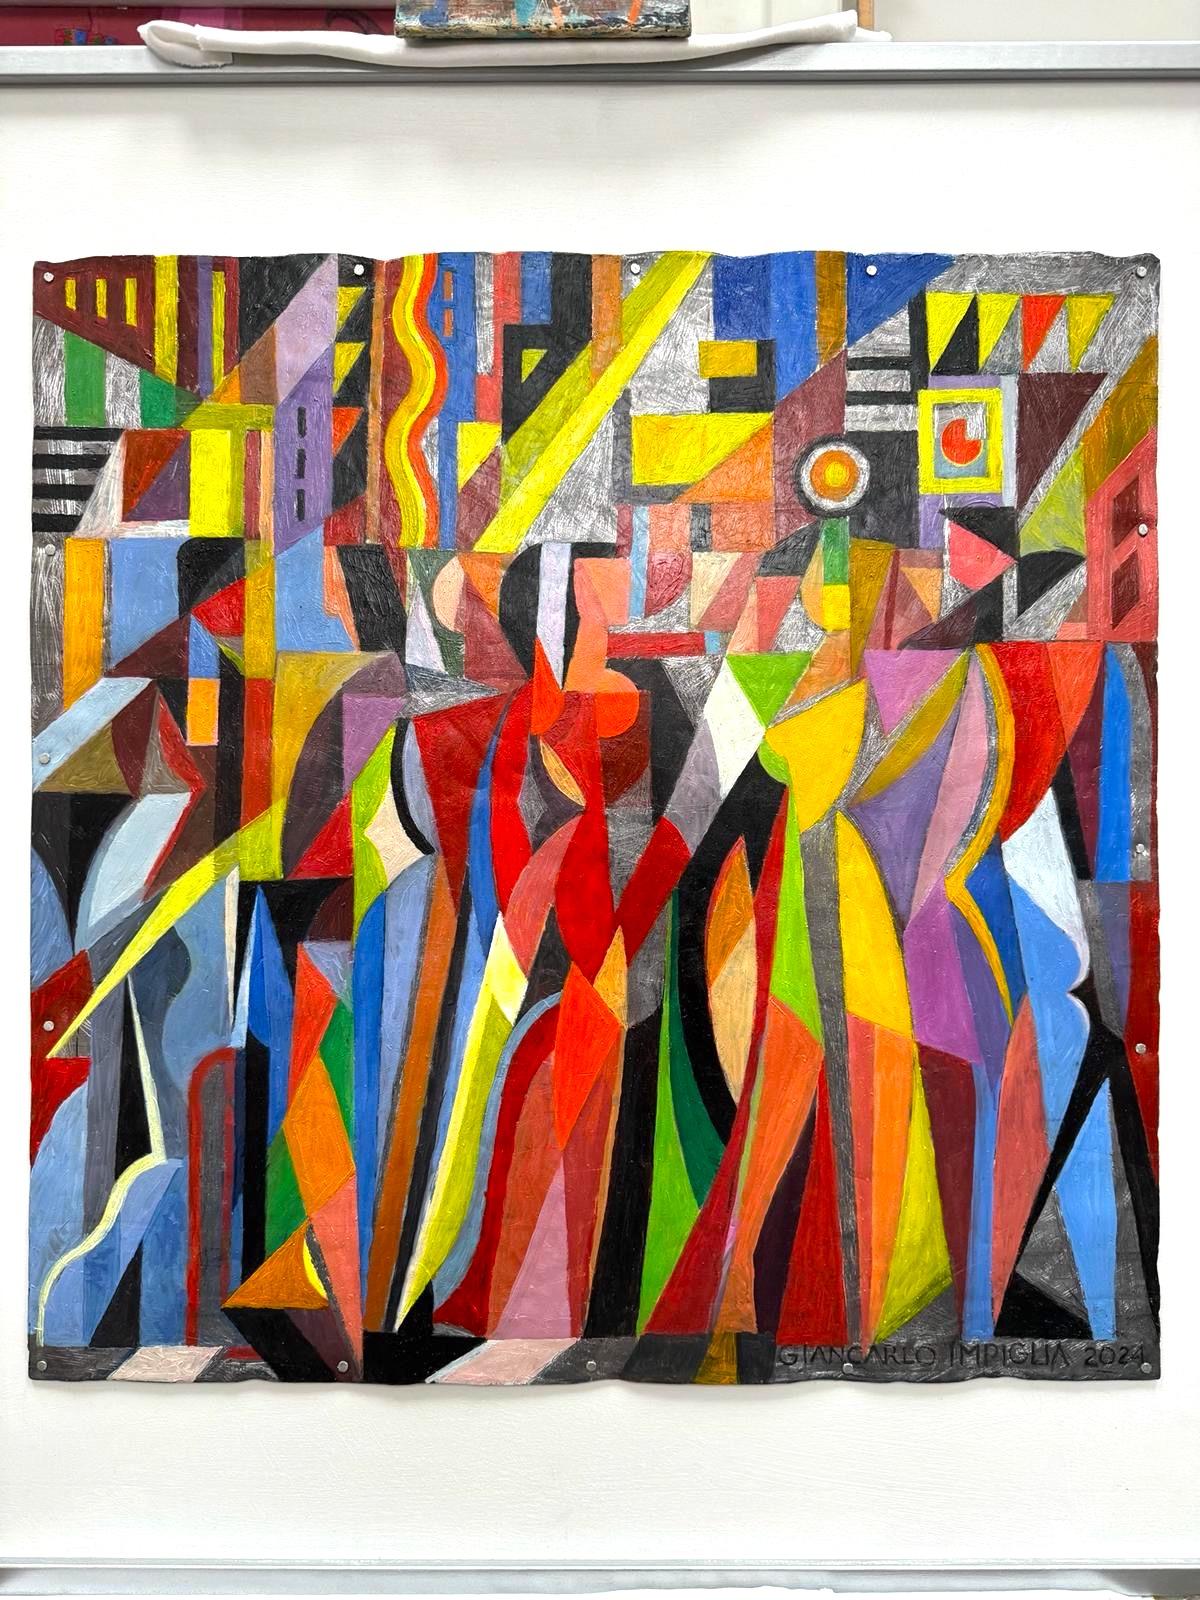 A new work by the indelible Giancarlo Impiglia. 

Born in Rome, Impiglia moved to New York in the 70s, where he established a signature style on the shoulders of Futurism and Cubism, his technical skill underpinning his eclecticism and allowing him